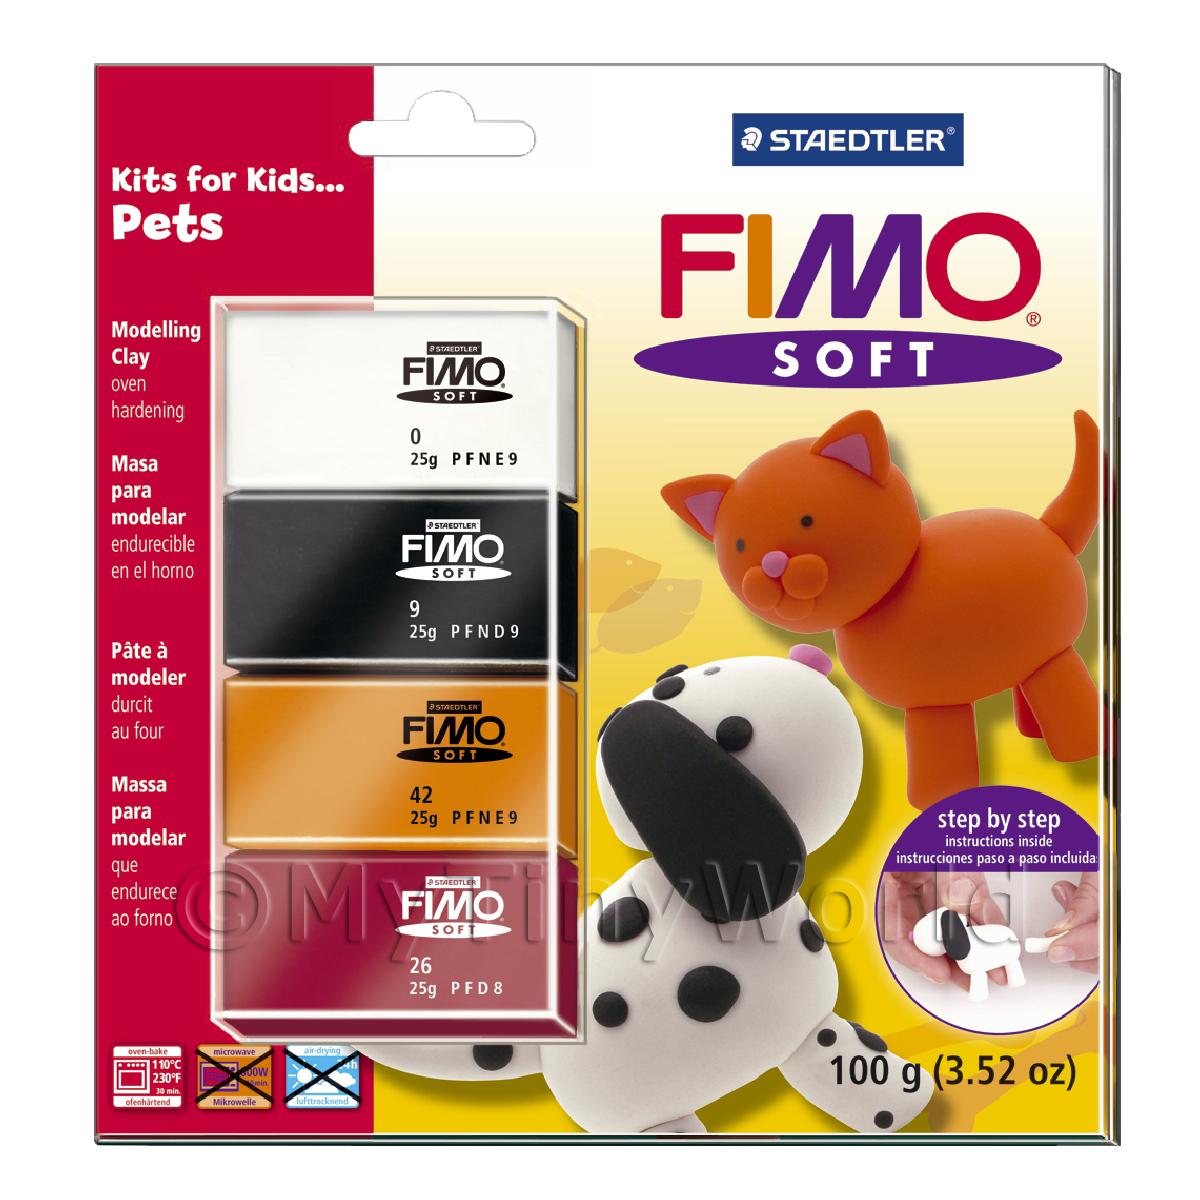 Dolls House FIMO Products - FIMO Soft Polymer Clay Kits For Kids